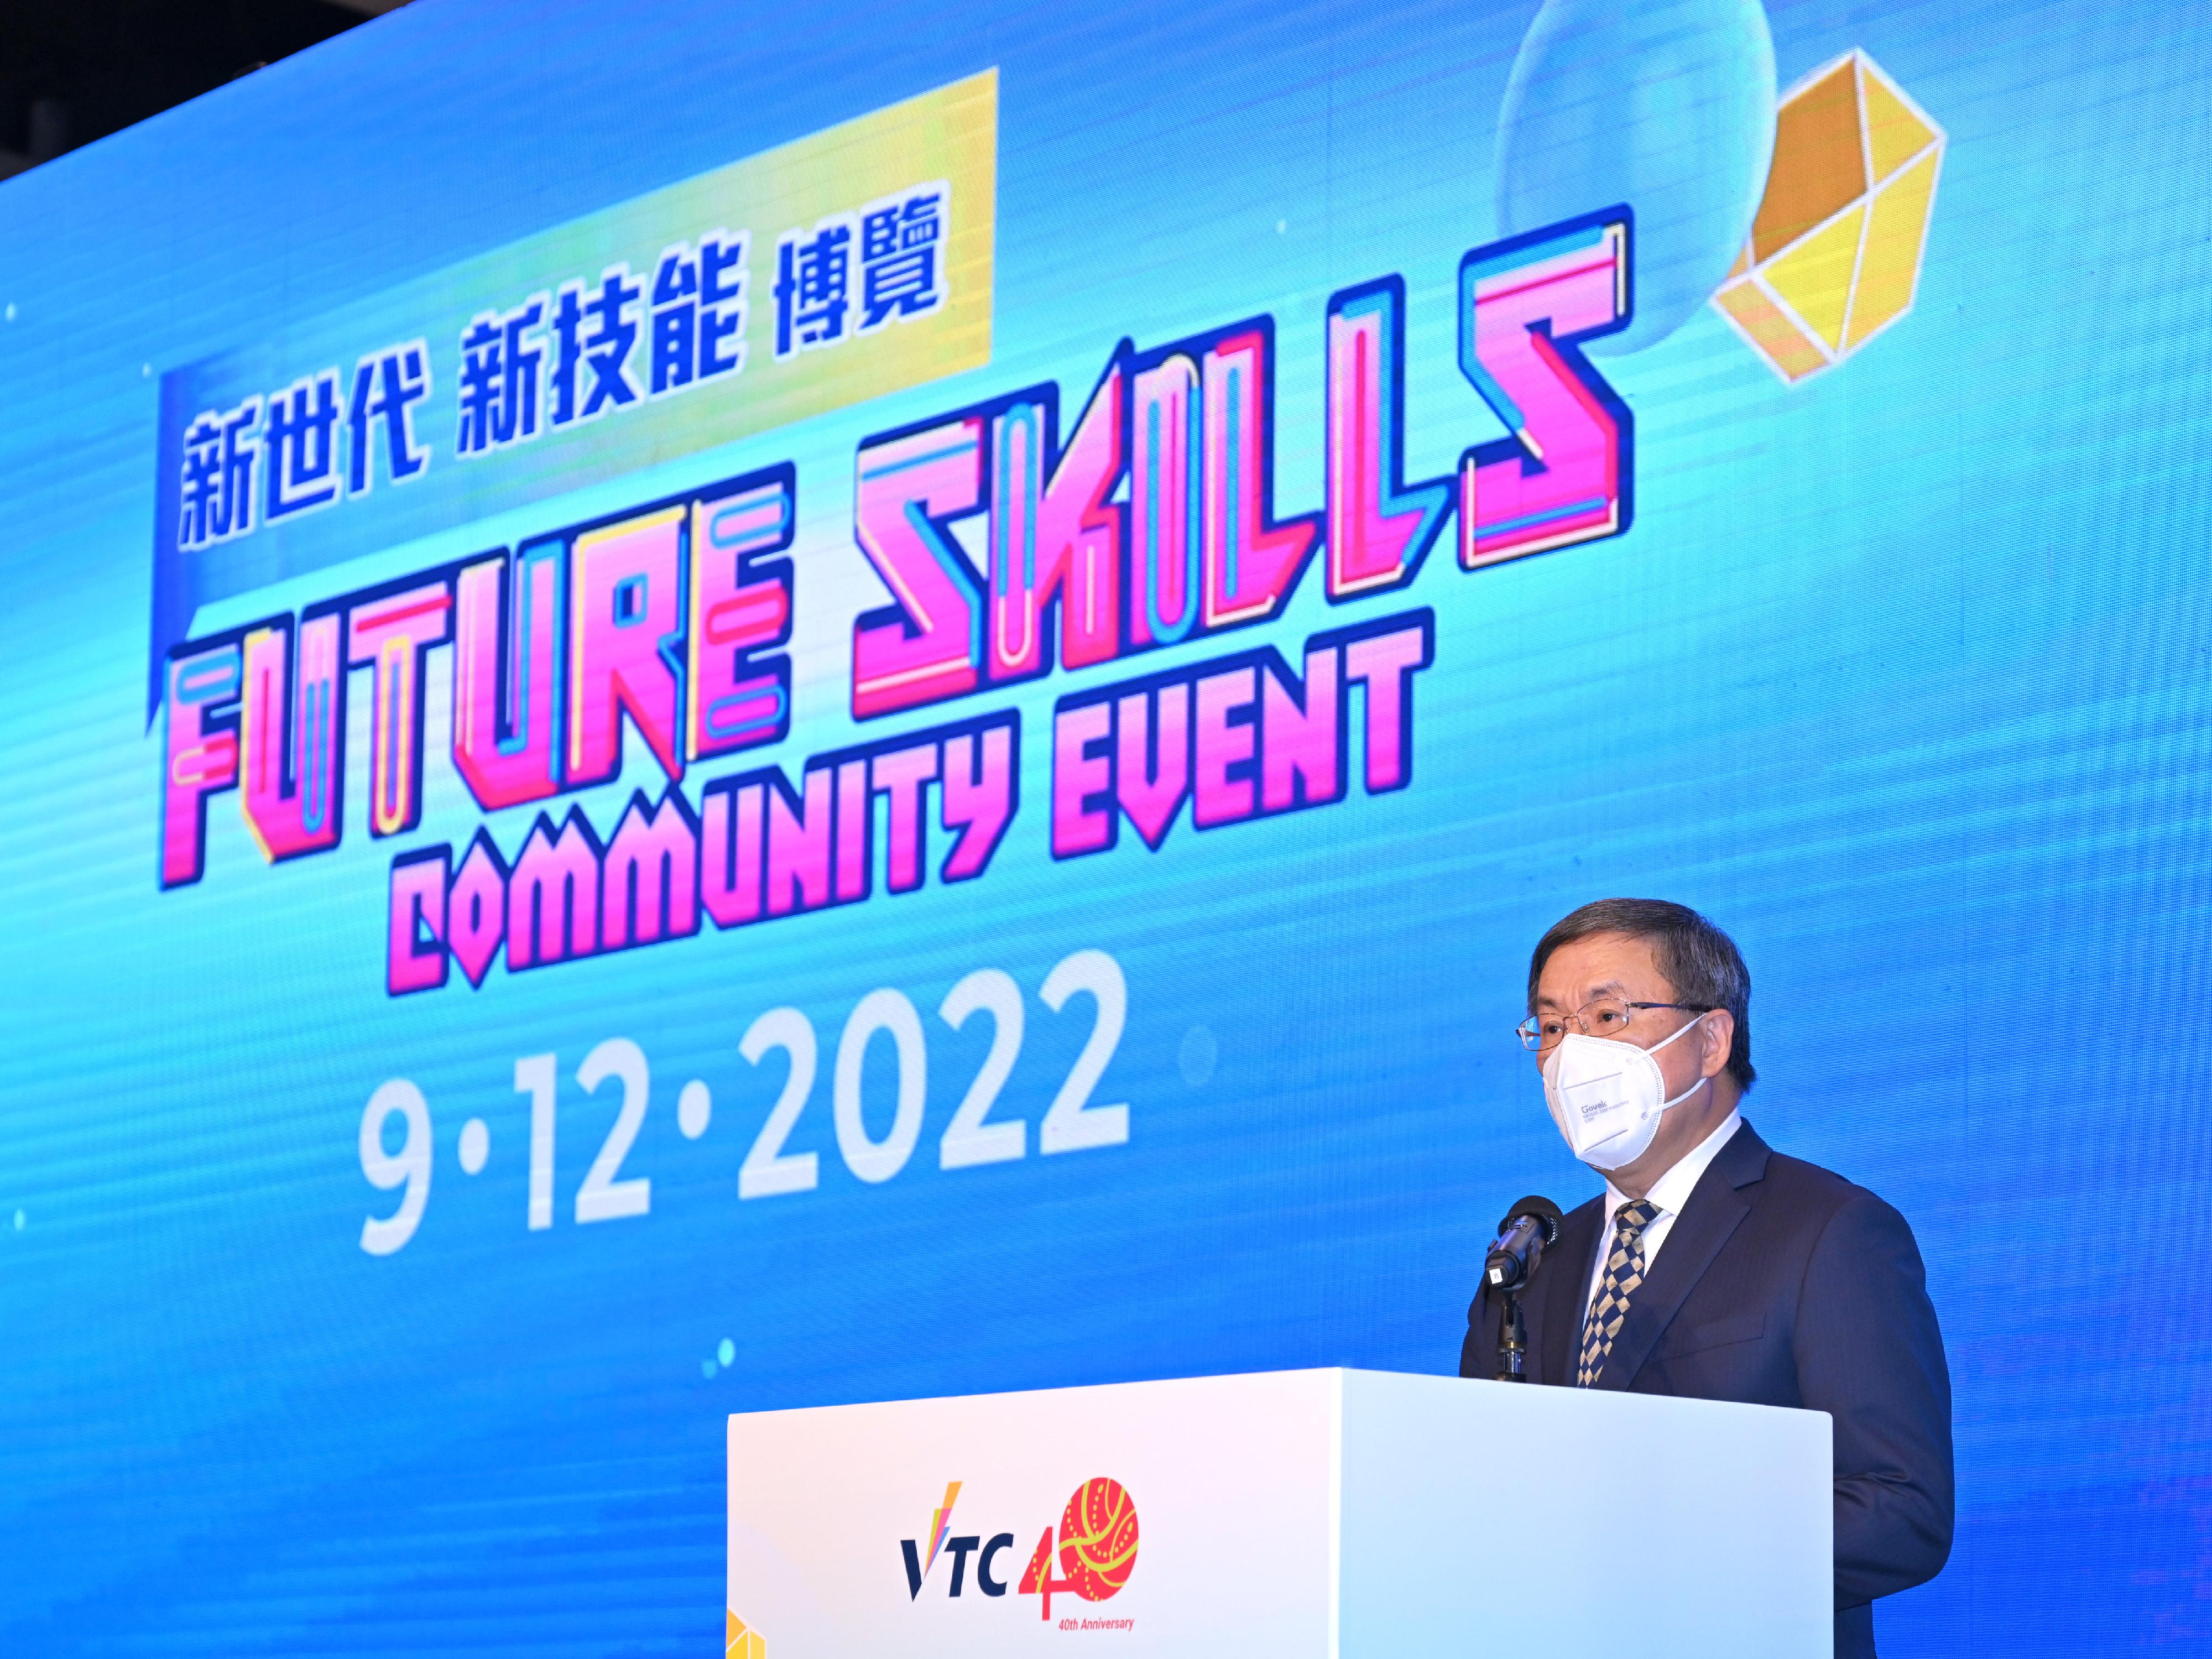 The Deputy Chief Secretary for Administration, Mr Cheuk Wing-hing, delivers a speech at the opening ceremony of VTC Future Skills Community Event today (December 9).